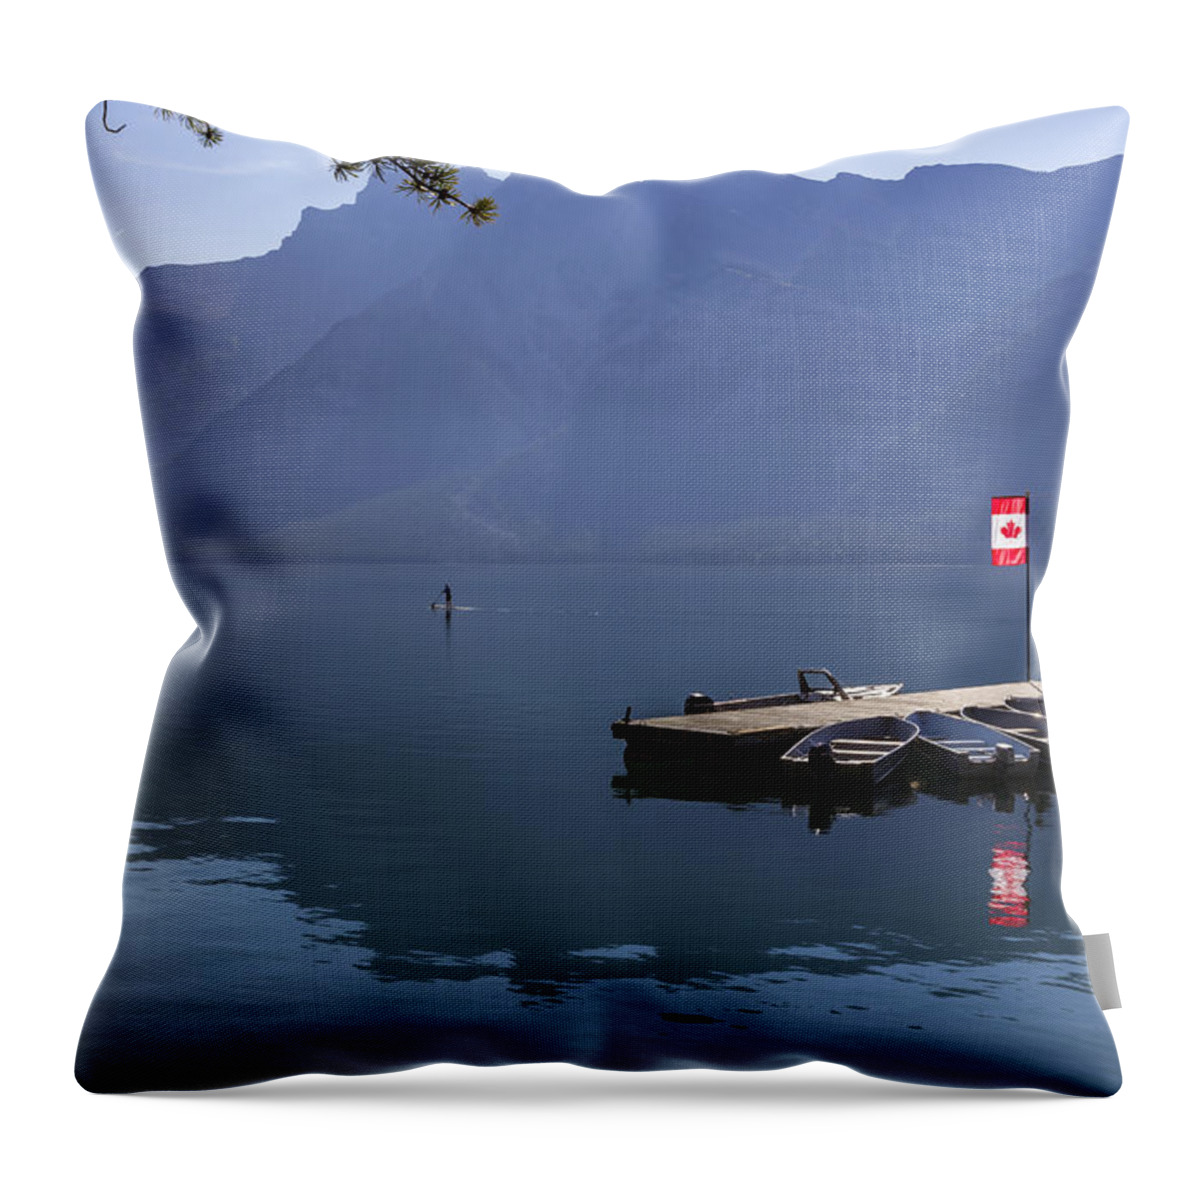 Canadian Serenity Throw Pillow featuring the photograph Canadian Serenity by Angela Stanton